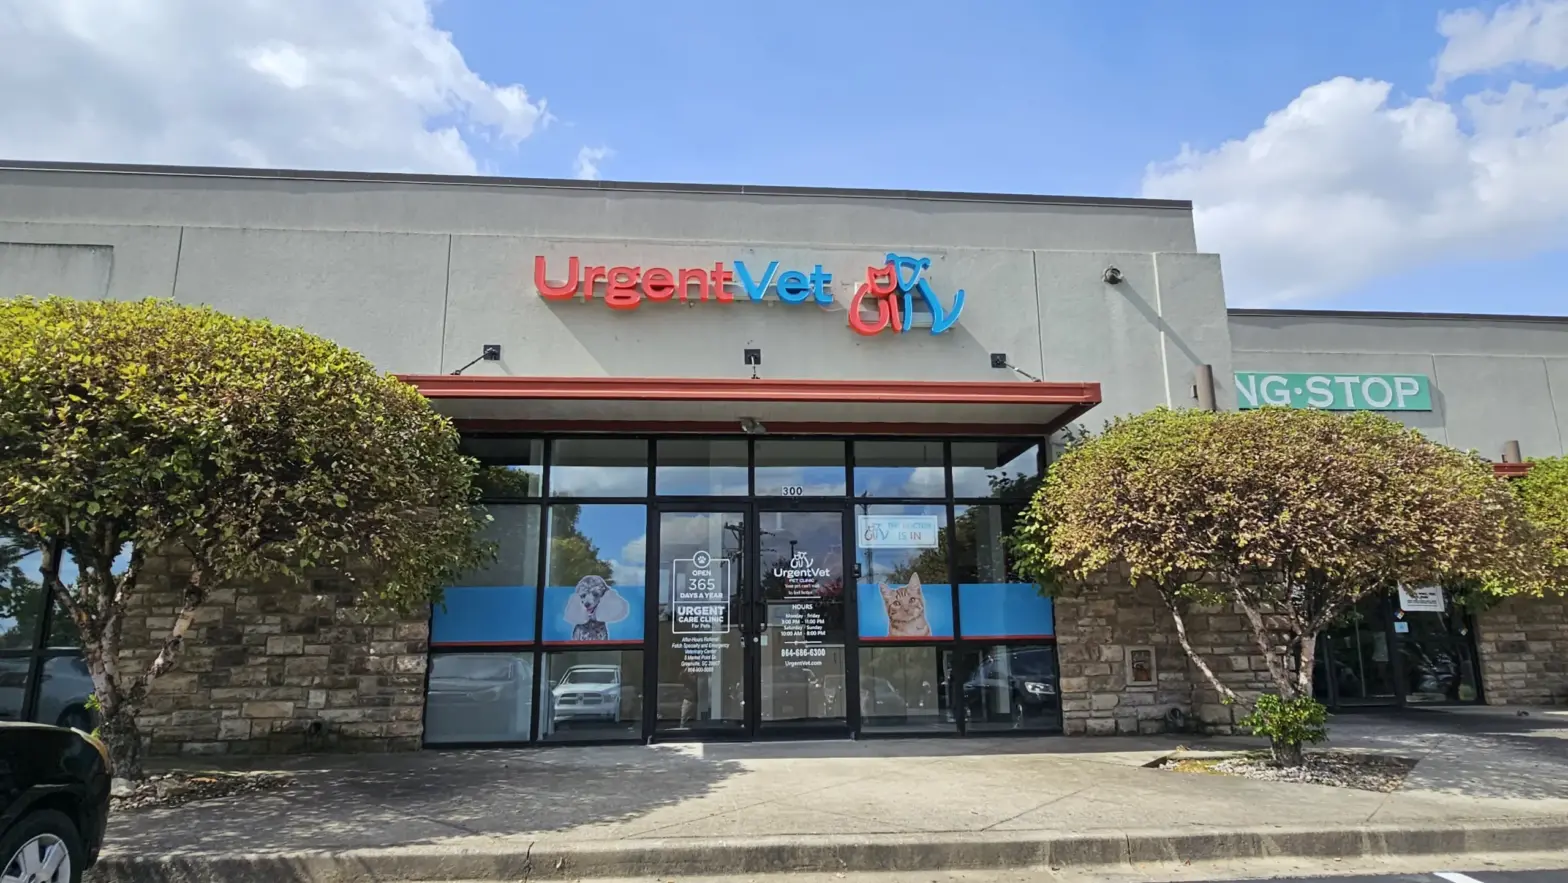 Featured image for post: After-Hours Pet Care Options in South Carolina Expand with the Addition of UrgentVet – Spartanburg